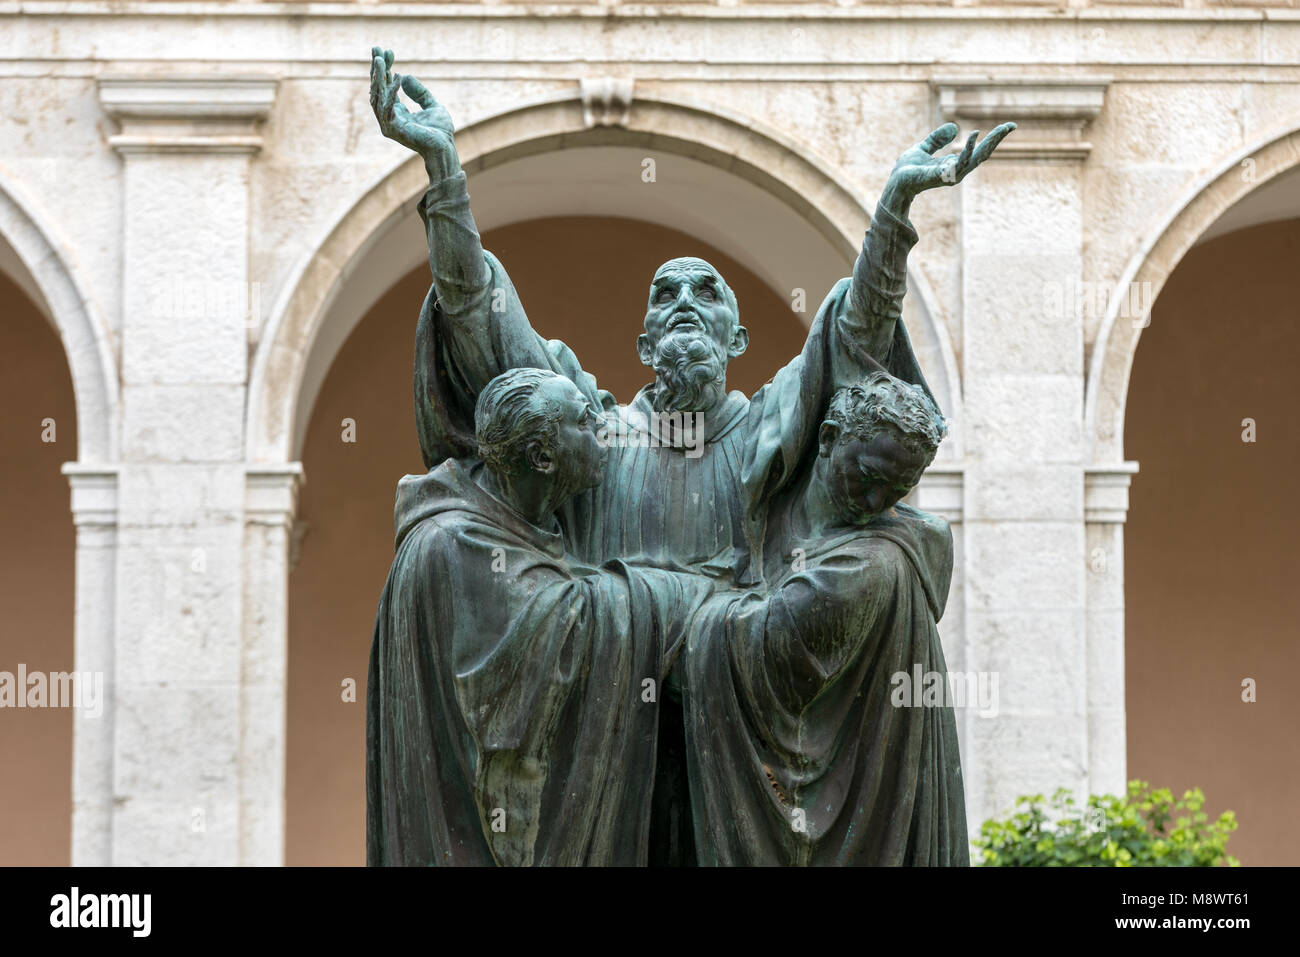 Montecassino, Italy - June 17, 2017: The entrance cloister of Monte Cassino Abbey and the death of Saint Benedict Statue. Italy Stock Photo